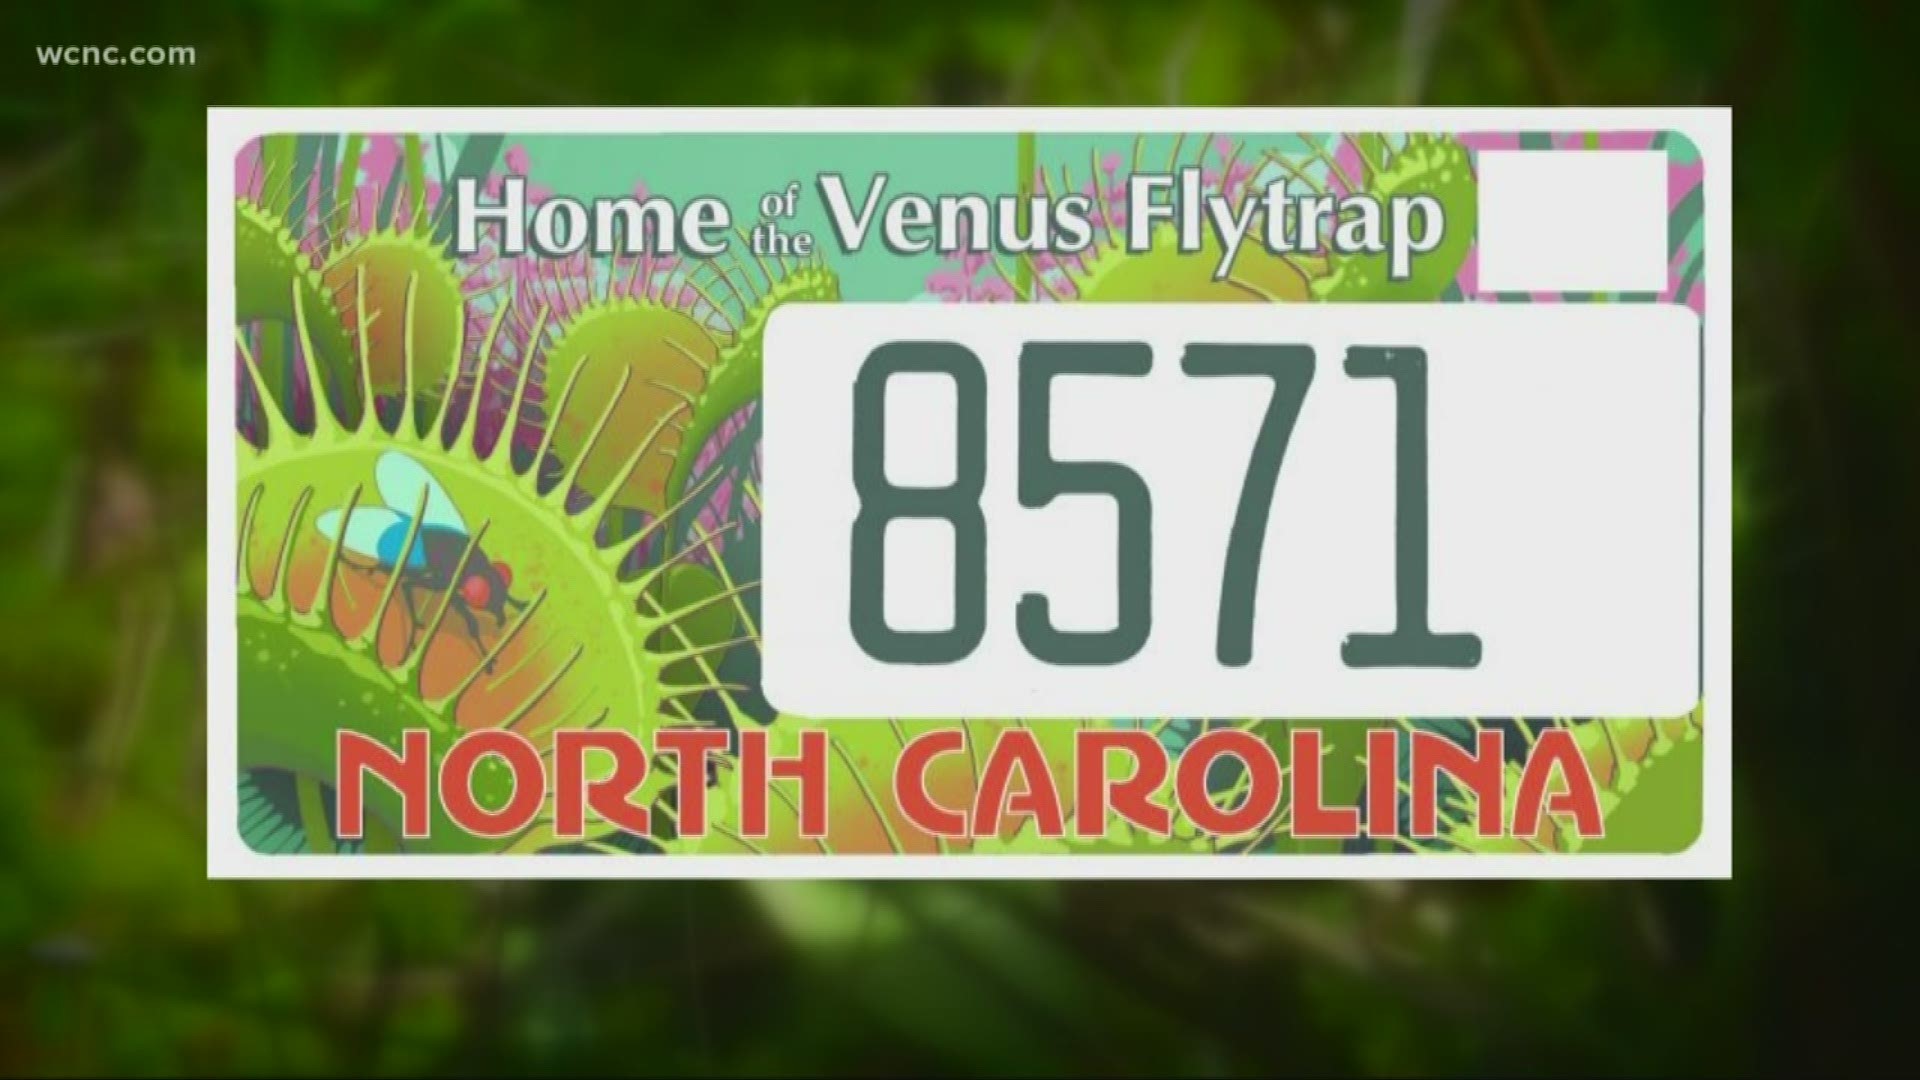 Conservationists are trying to save the world-famous venus flytrap. The carnivorous plant only grows in an area near Wilmington.